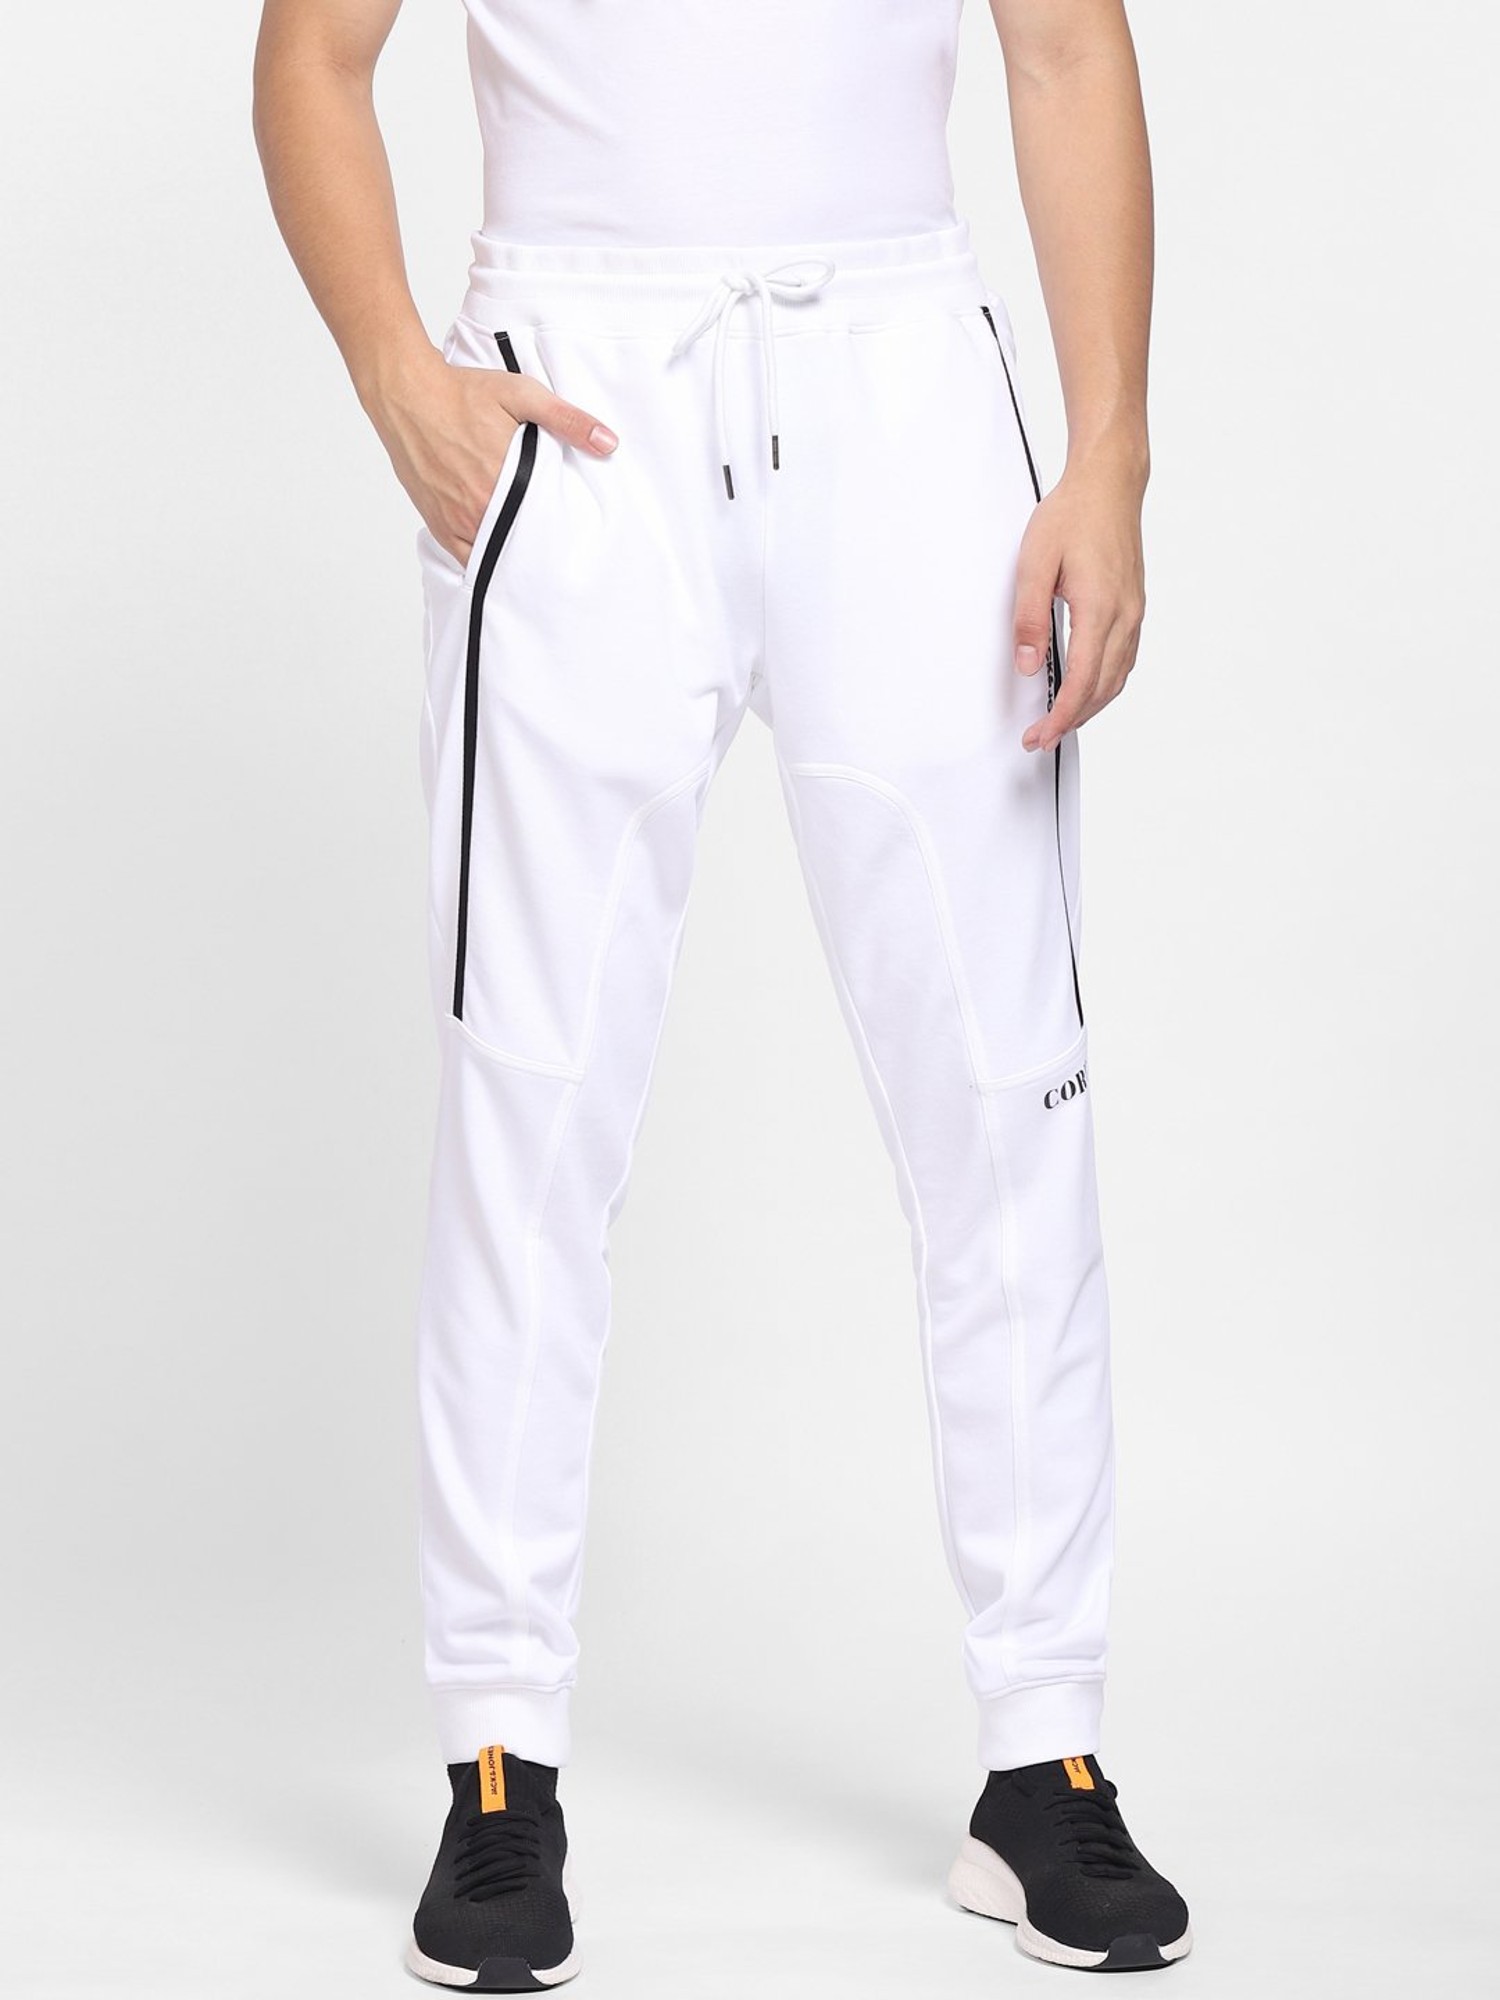 Buy THE BEAR HOUSE Ardor Edition Men White Solid Slim Fit Track Pants online